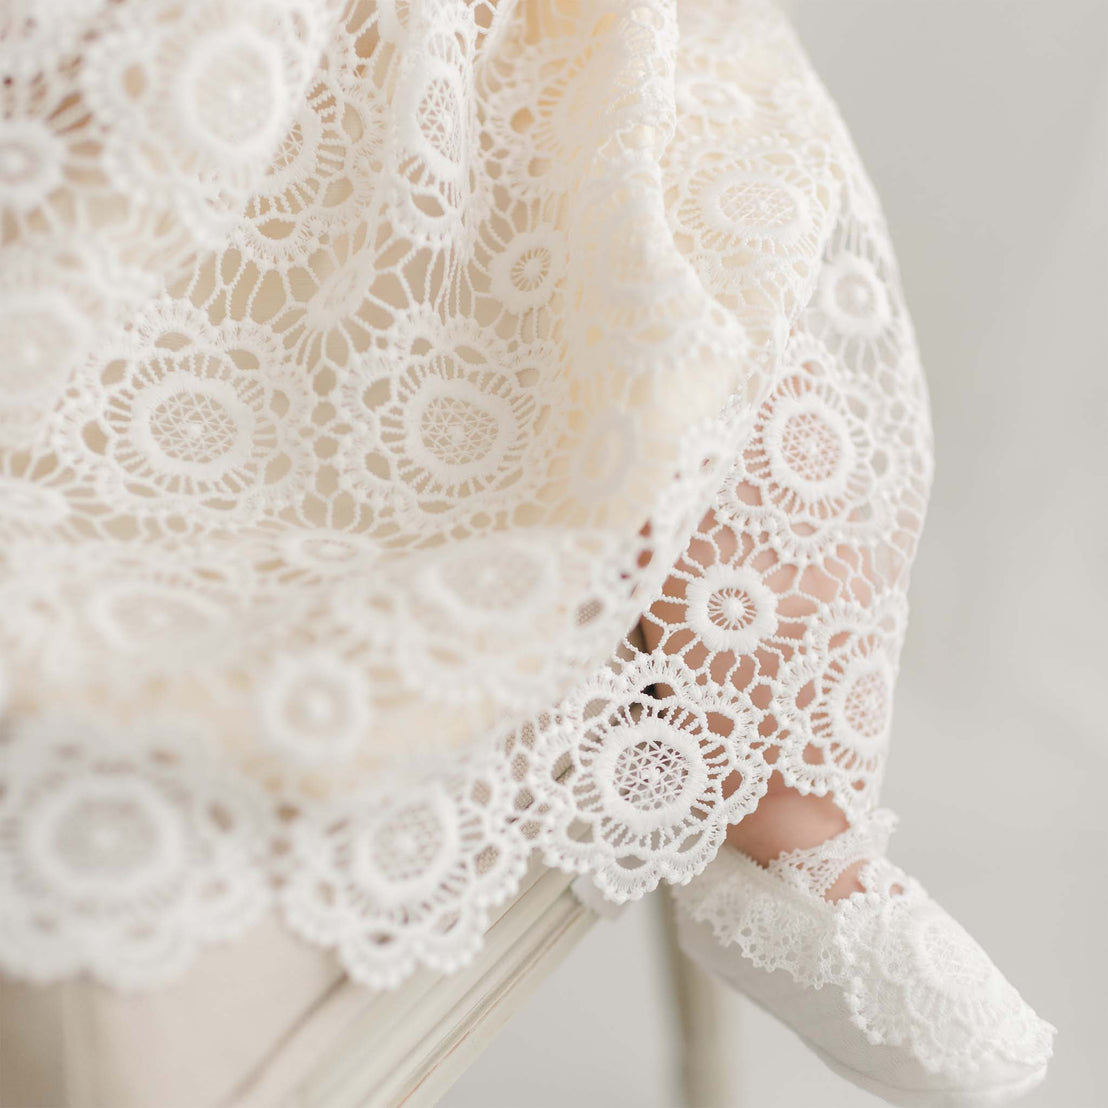 A close-up of a delicate Poppy Blessing Dress & Bonnet and matching shoes worn by an infant. The lace features intricate circular patterns with floral motifs, and the baby is seated on a white surface. The soft lighting highlights the texture and detail of the lace fabric, complemented by a silk dupioni lining.